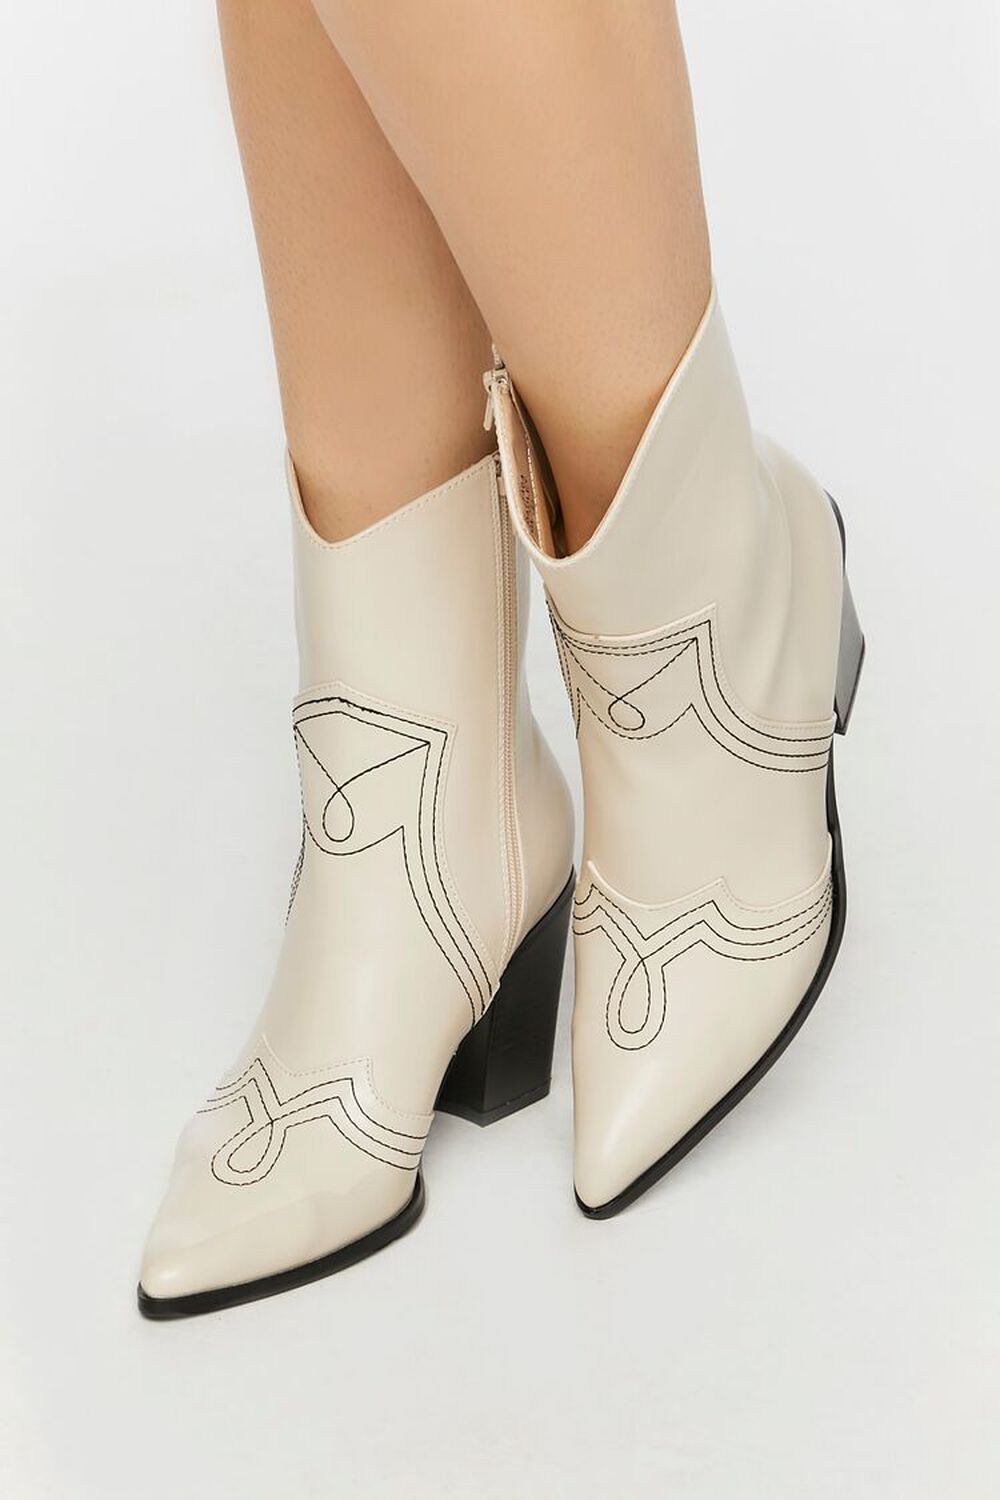 WHITE Faux Leather Contrast Cowboy Boots, image 1